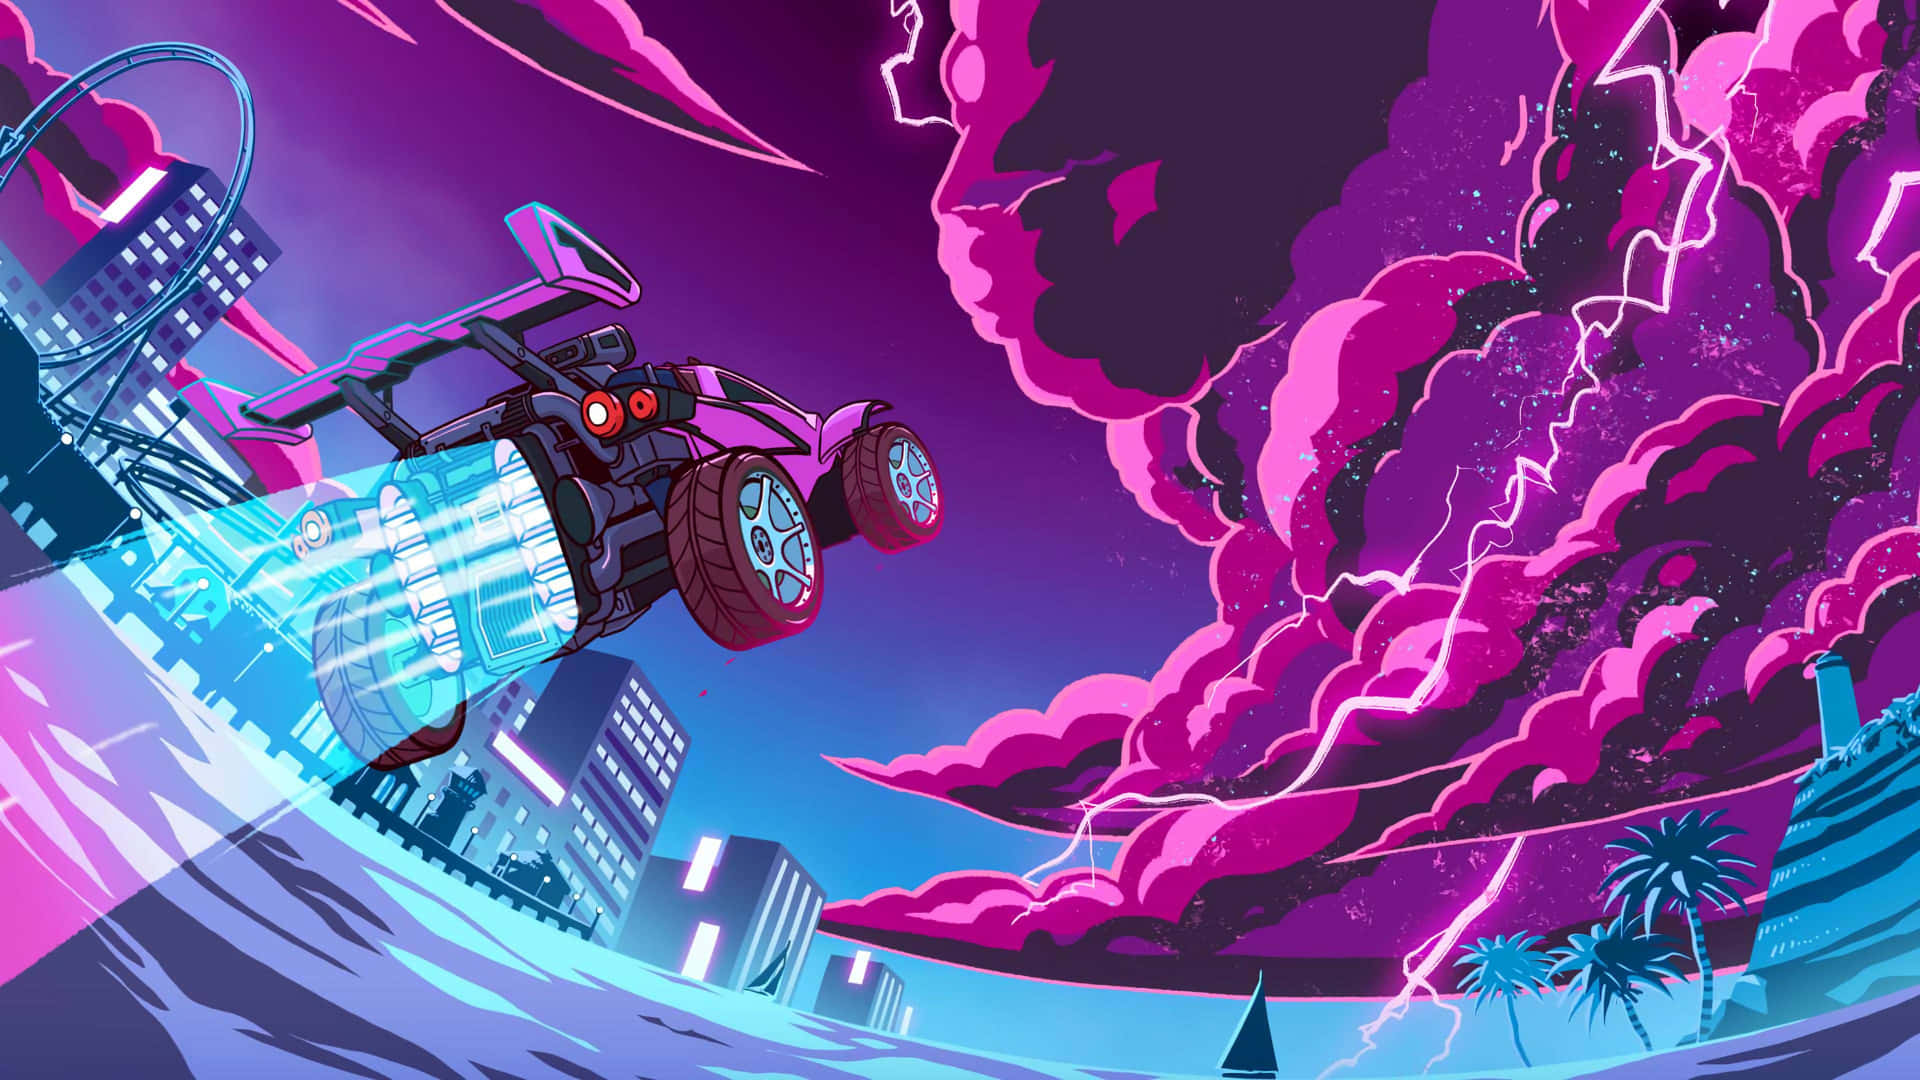 A Purple Car Driving Through A City With Lightning Wallpaper